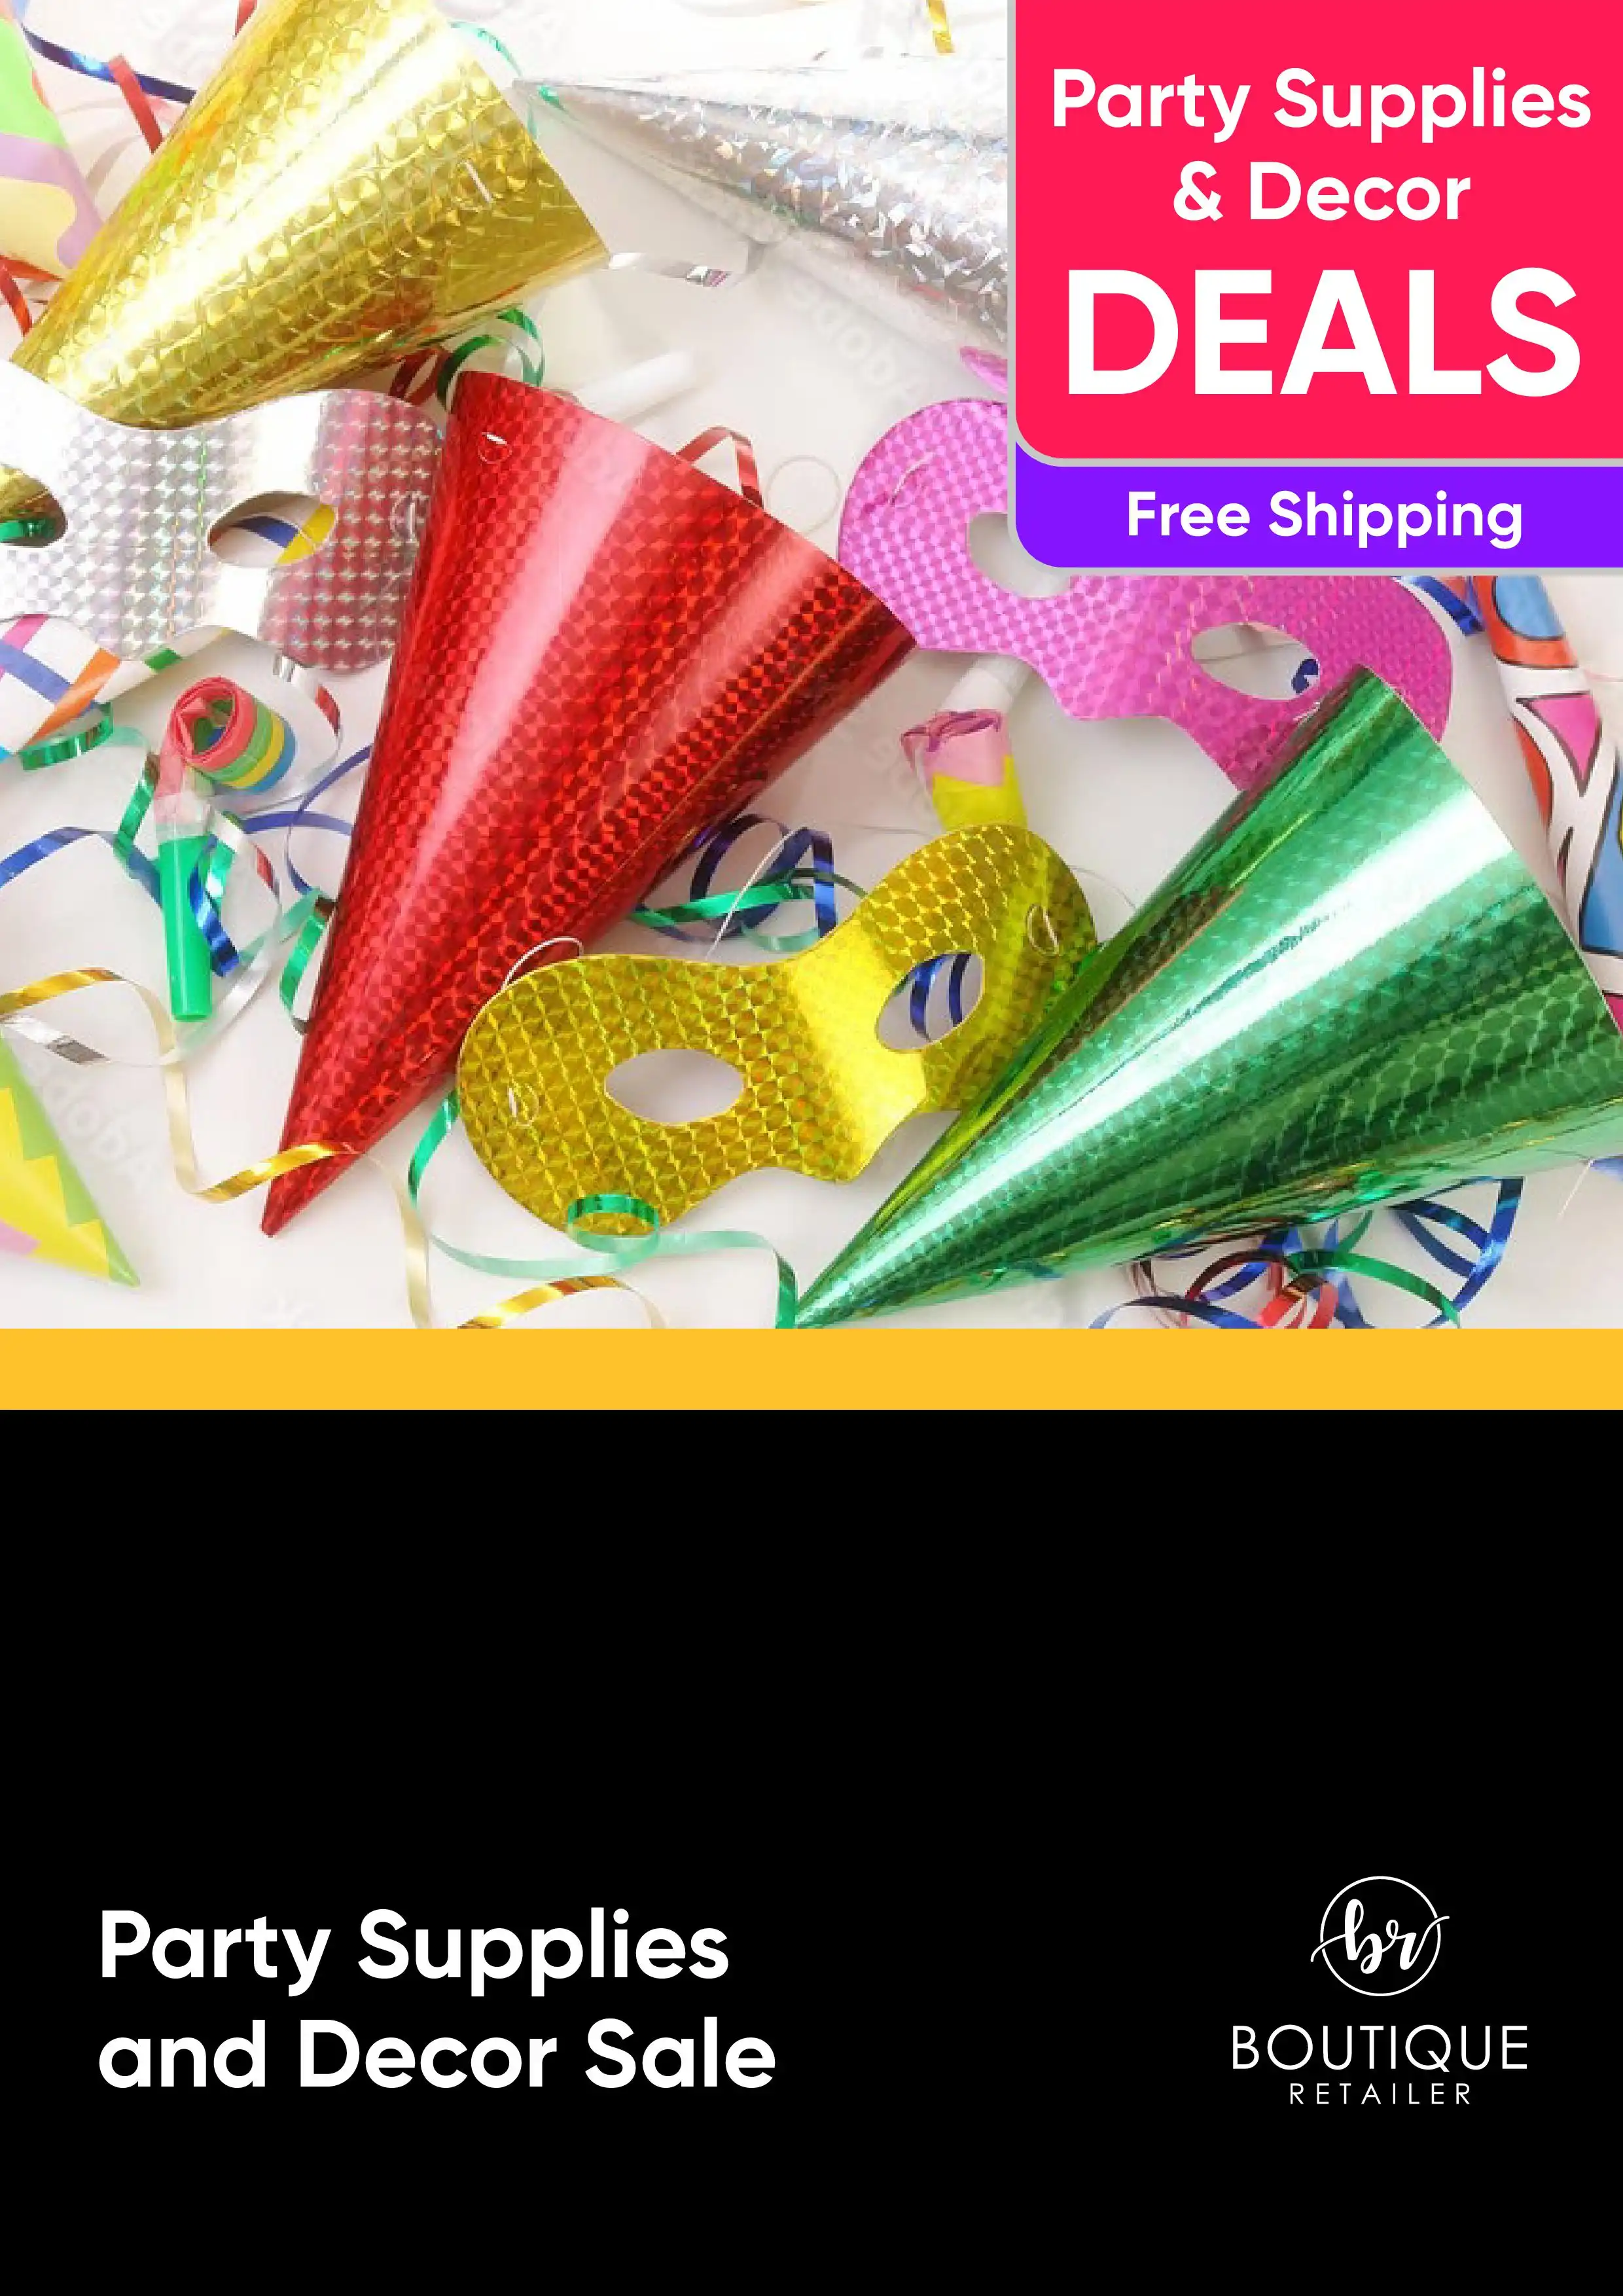 Party Supplies & Decor Sale - Free Shipping